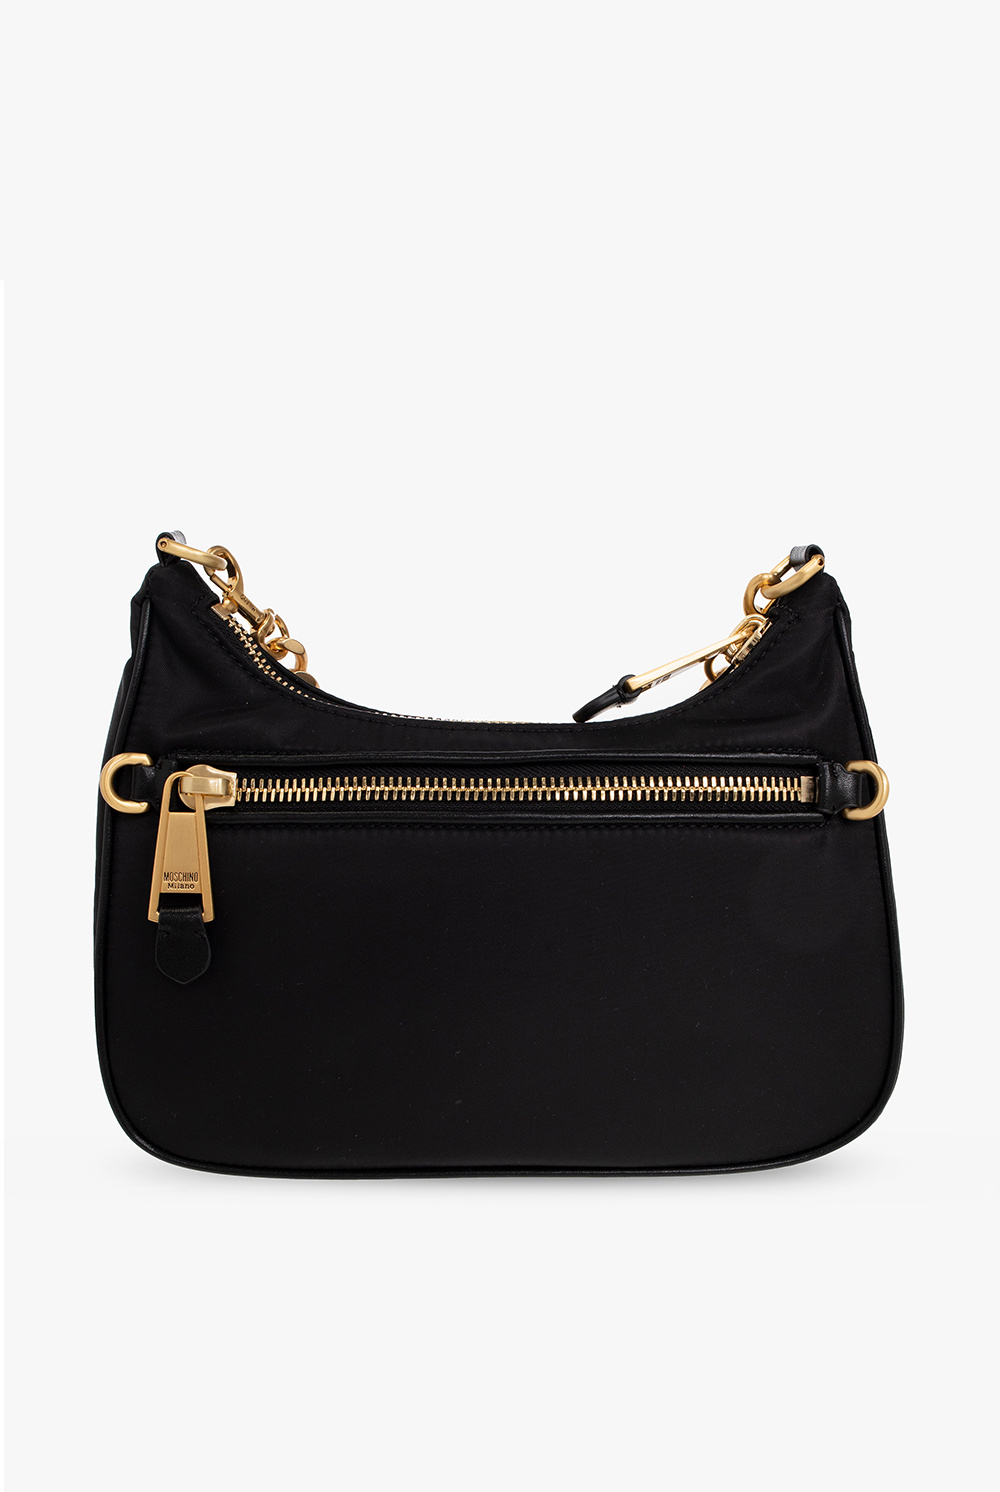 Moschino Black Grained Leather GG Ring Shoulder Bag